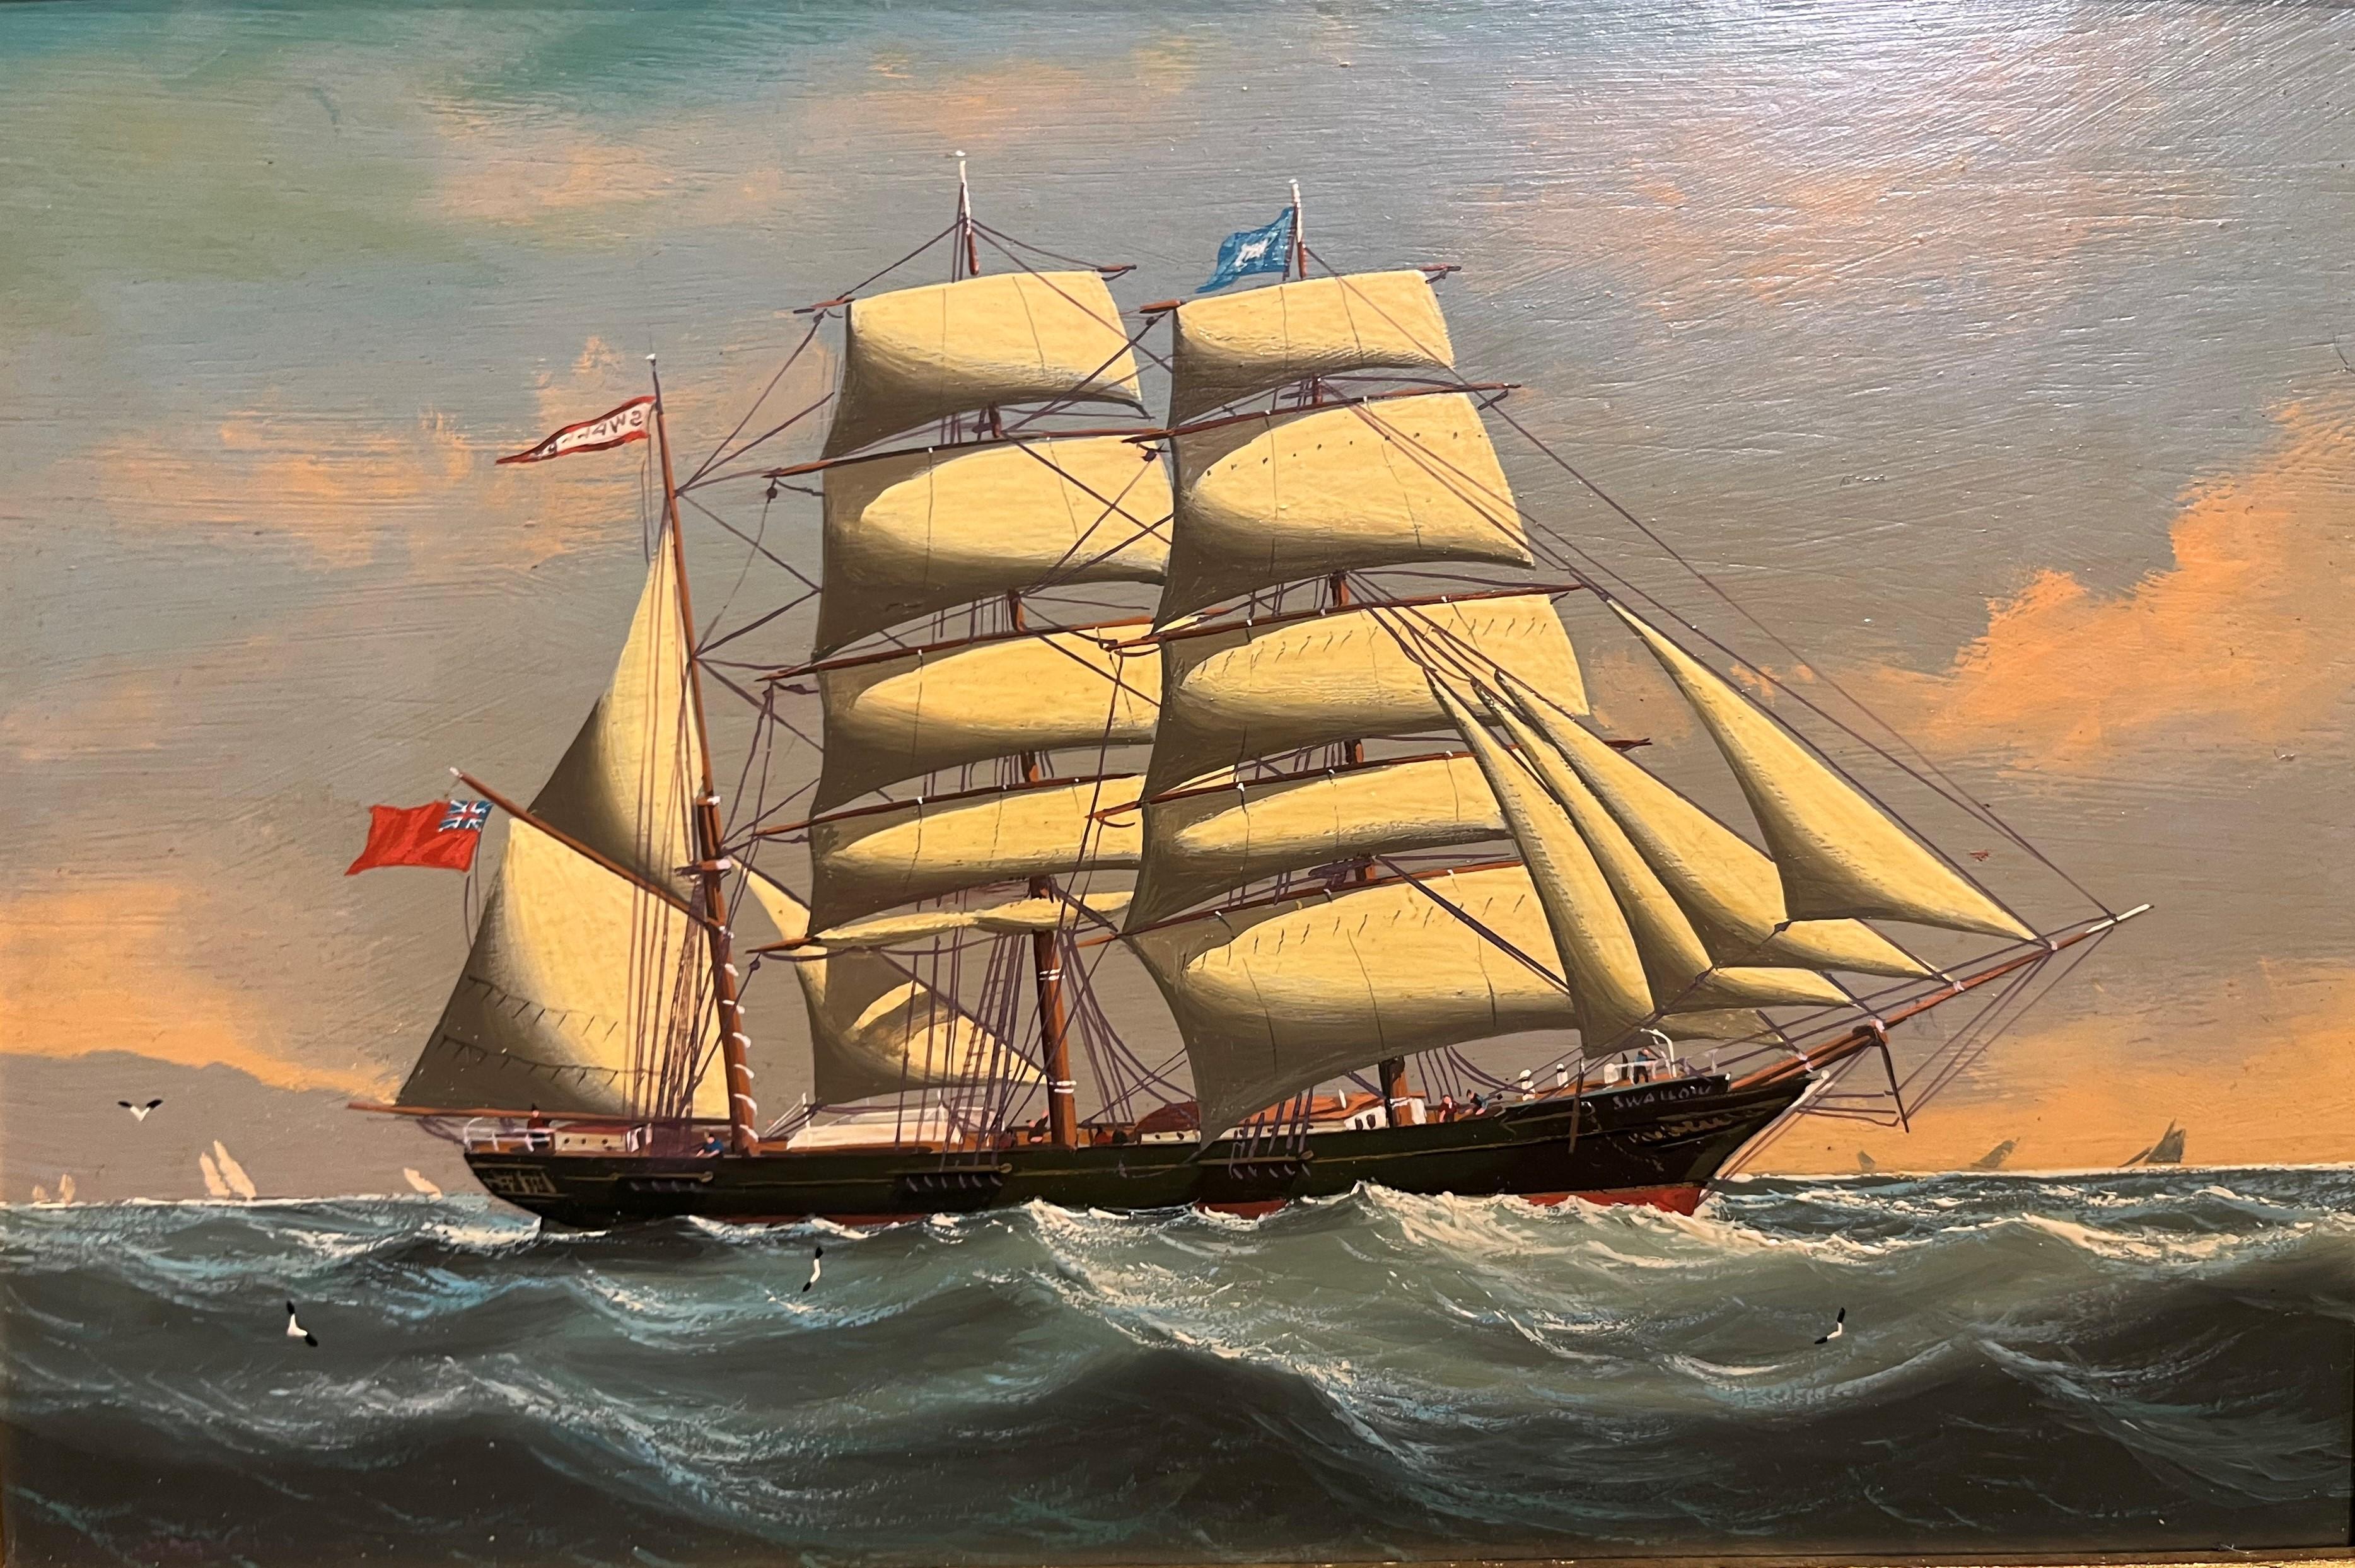 OIL PAINTING Small von SALVATORE COLACICCO (NAVY ADMIRALTY 20th CENTURY PIECE  (Realismus), Painting, von Salvatore Colacicco